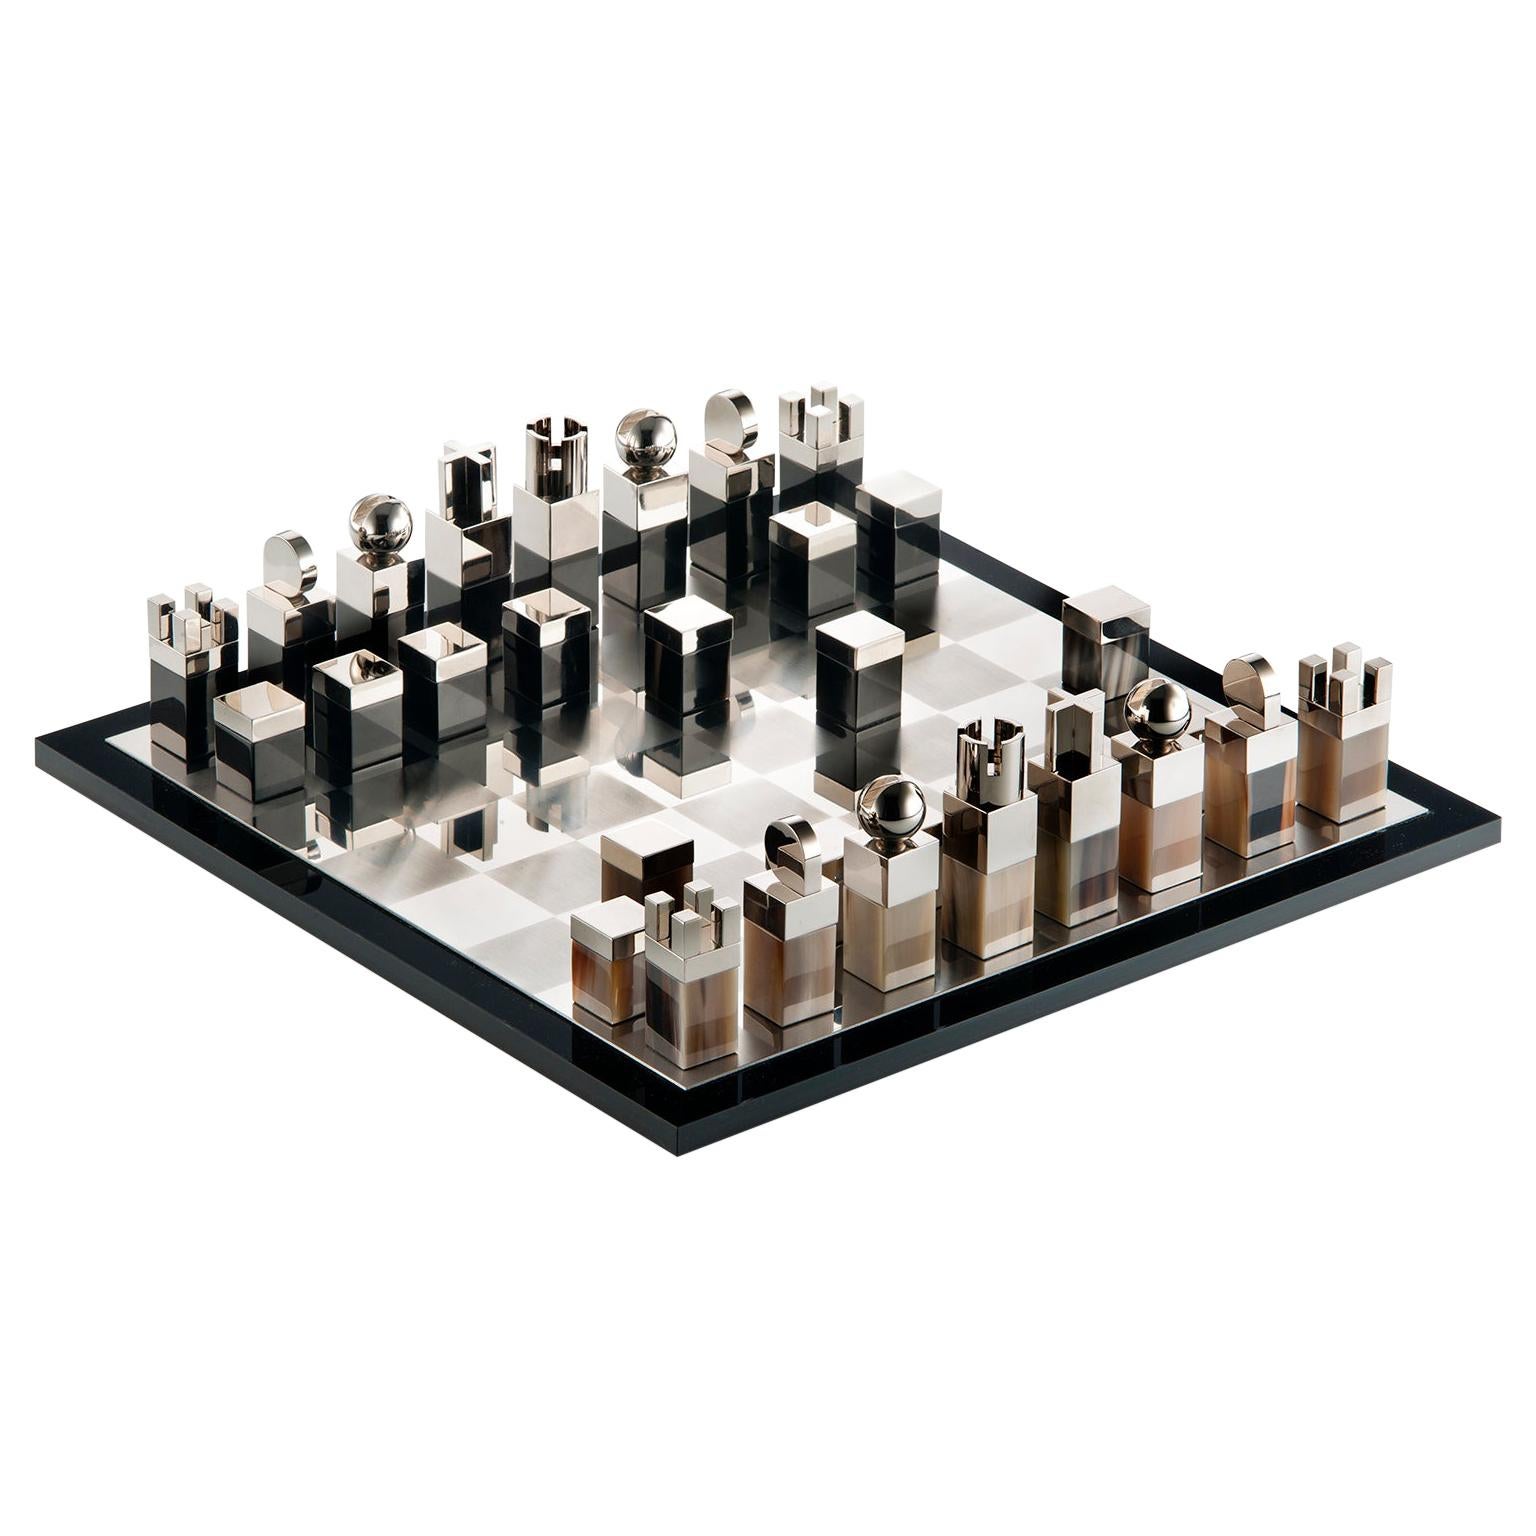 Nelson Chess Set in Corno Italiano and Palladium-Plated Brass, Mod. 3010 For Sale